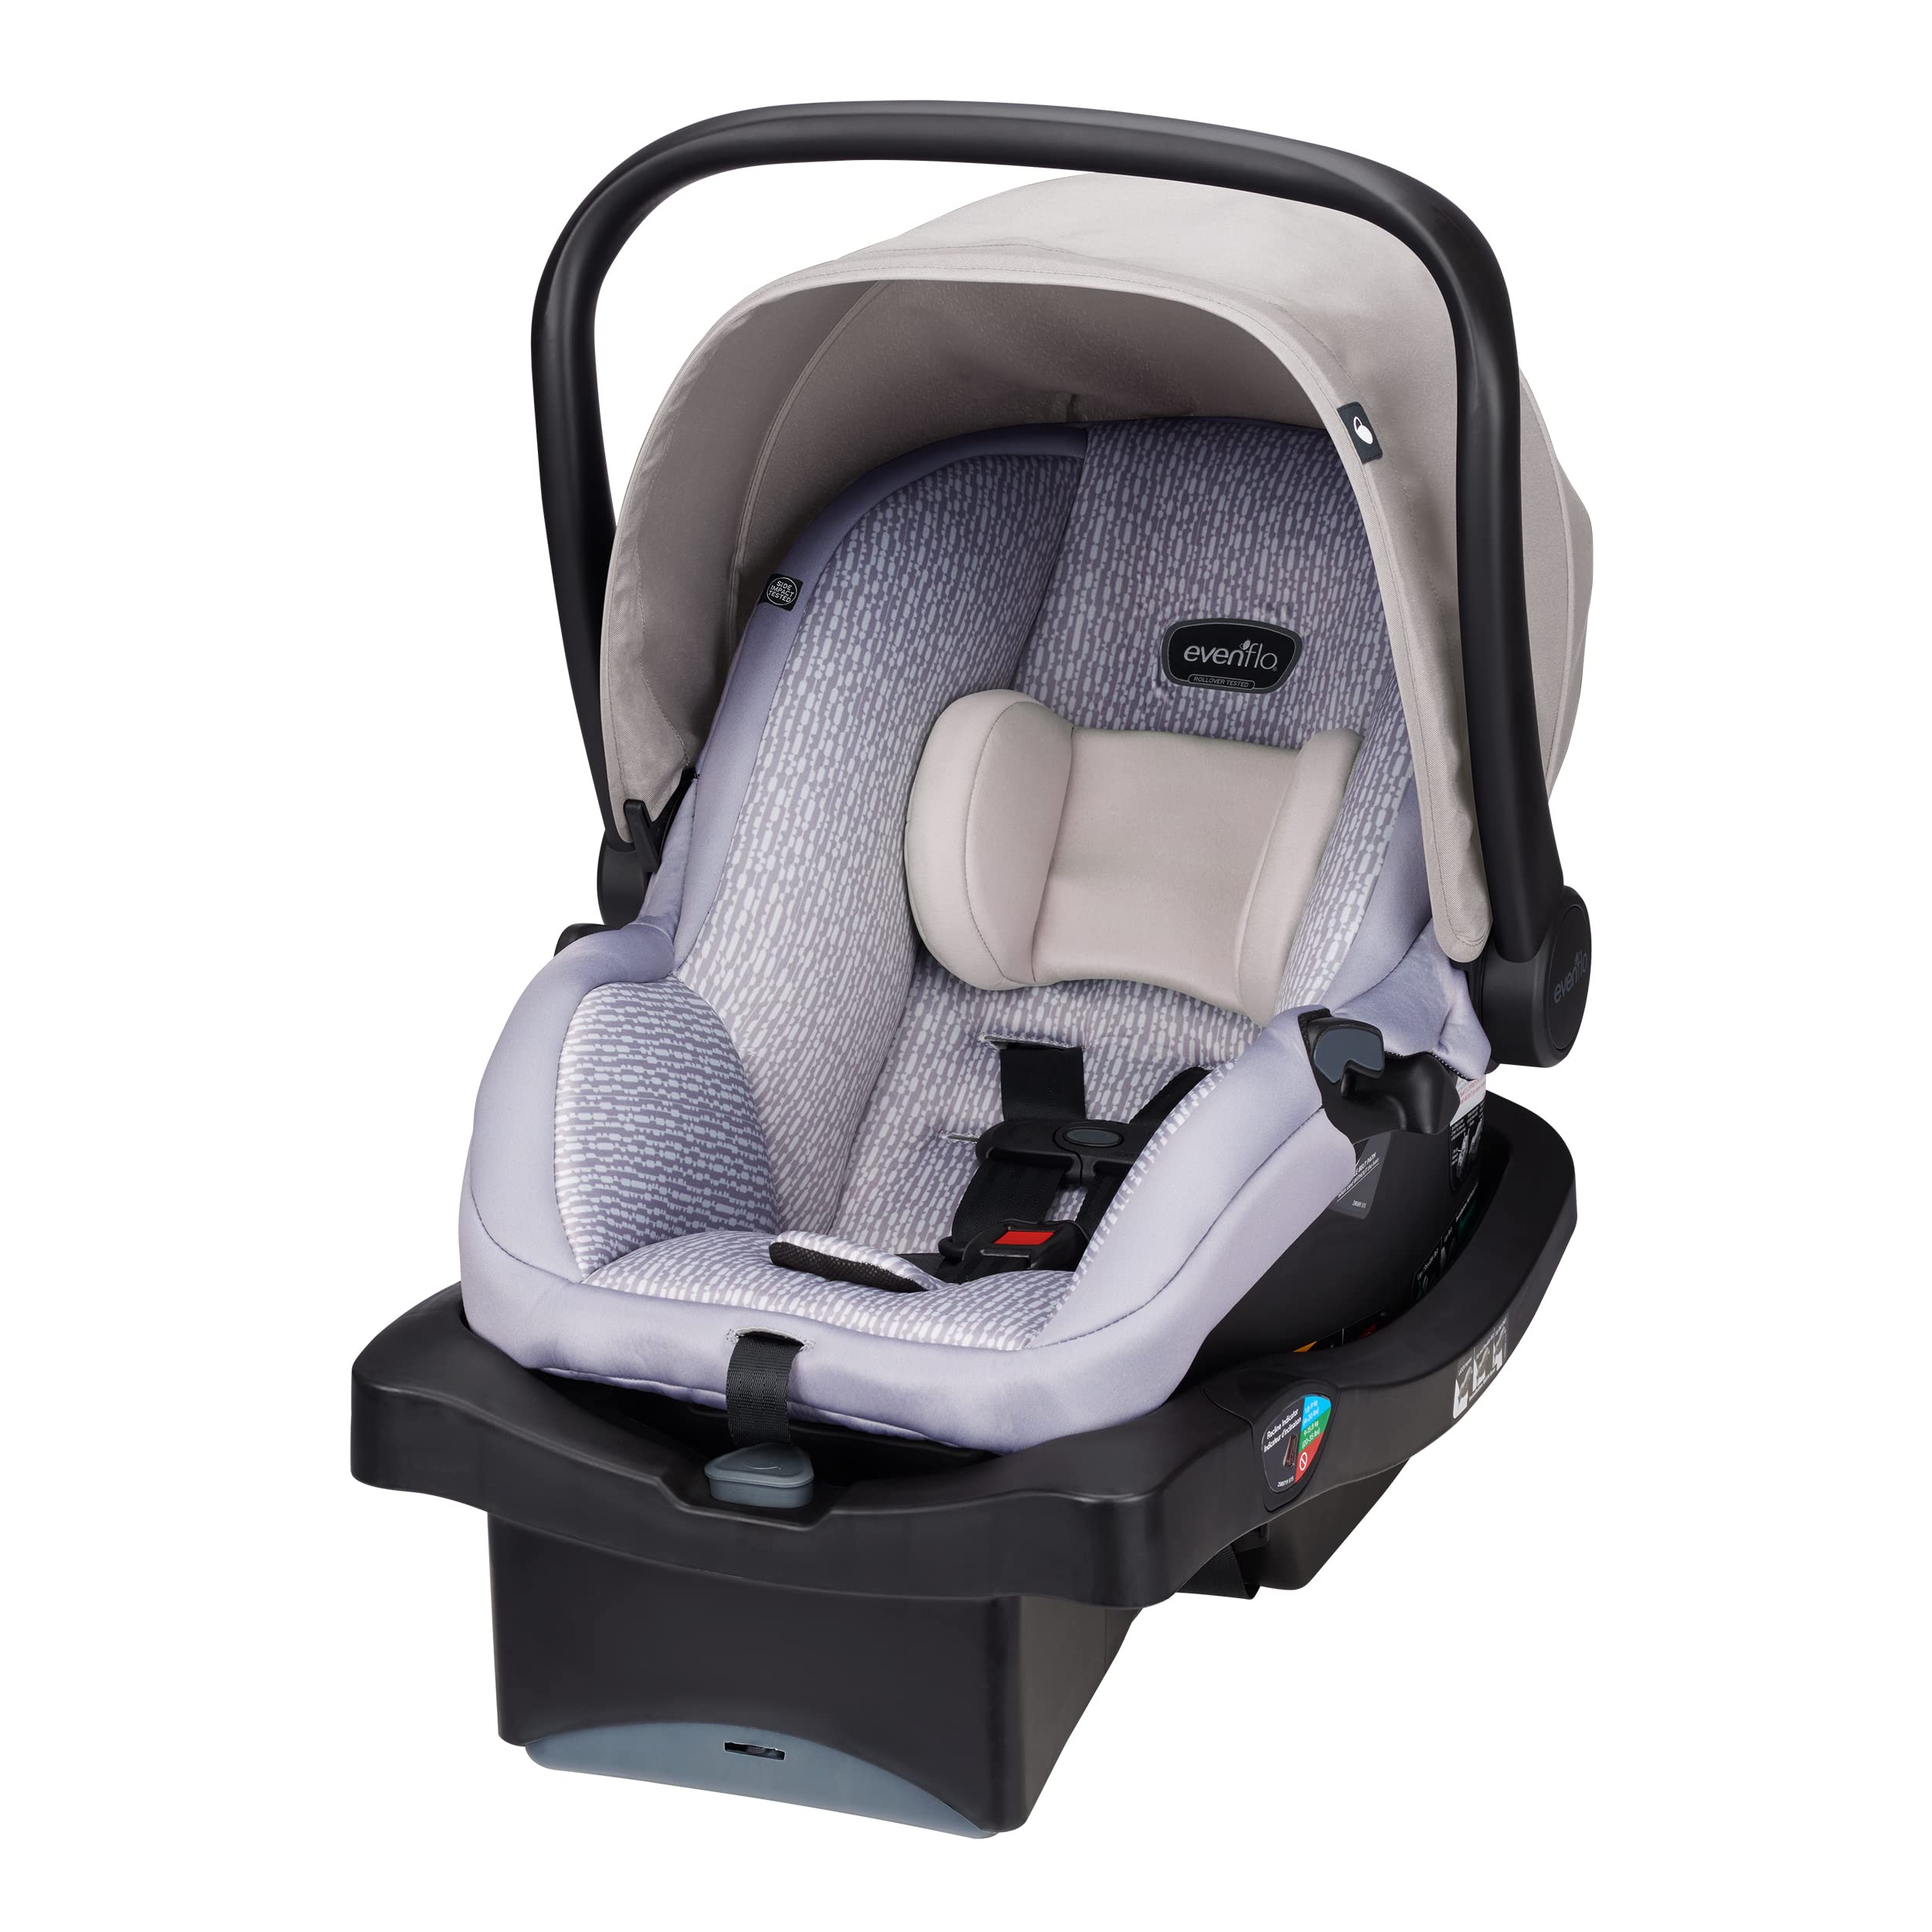 Evenflo LiteMax Infant Car Seat, 18.3x17.8x30 Inch (Pack of 1)